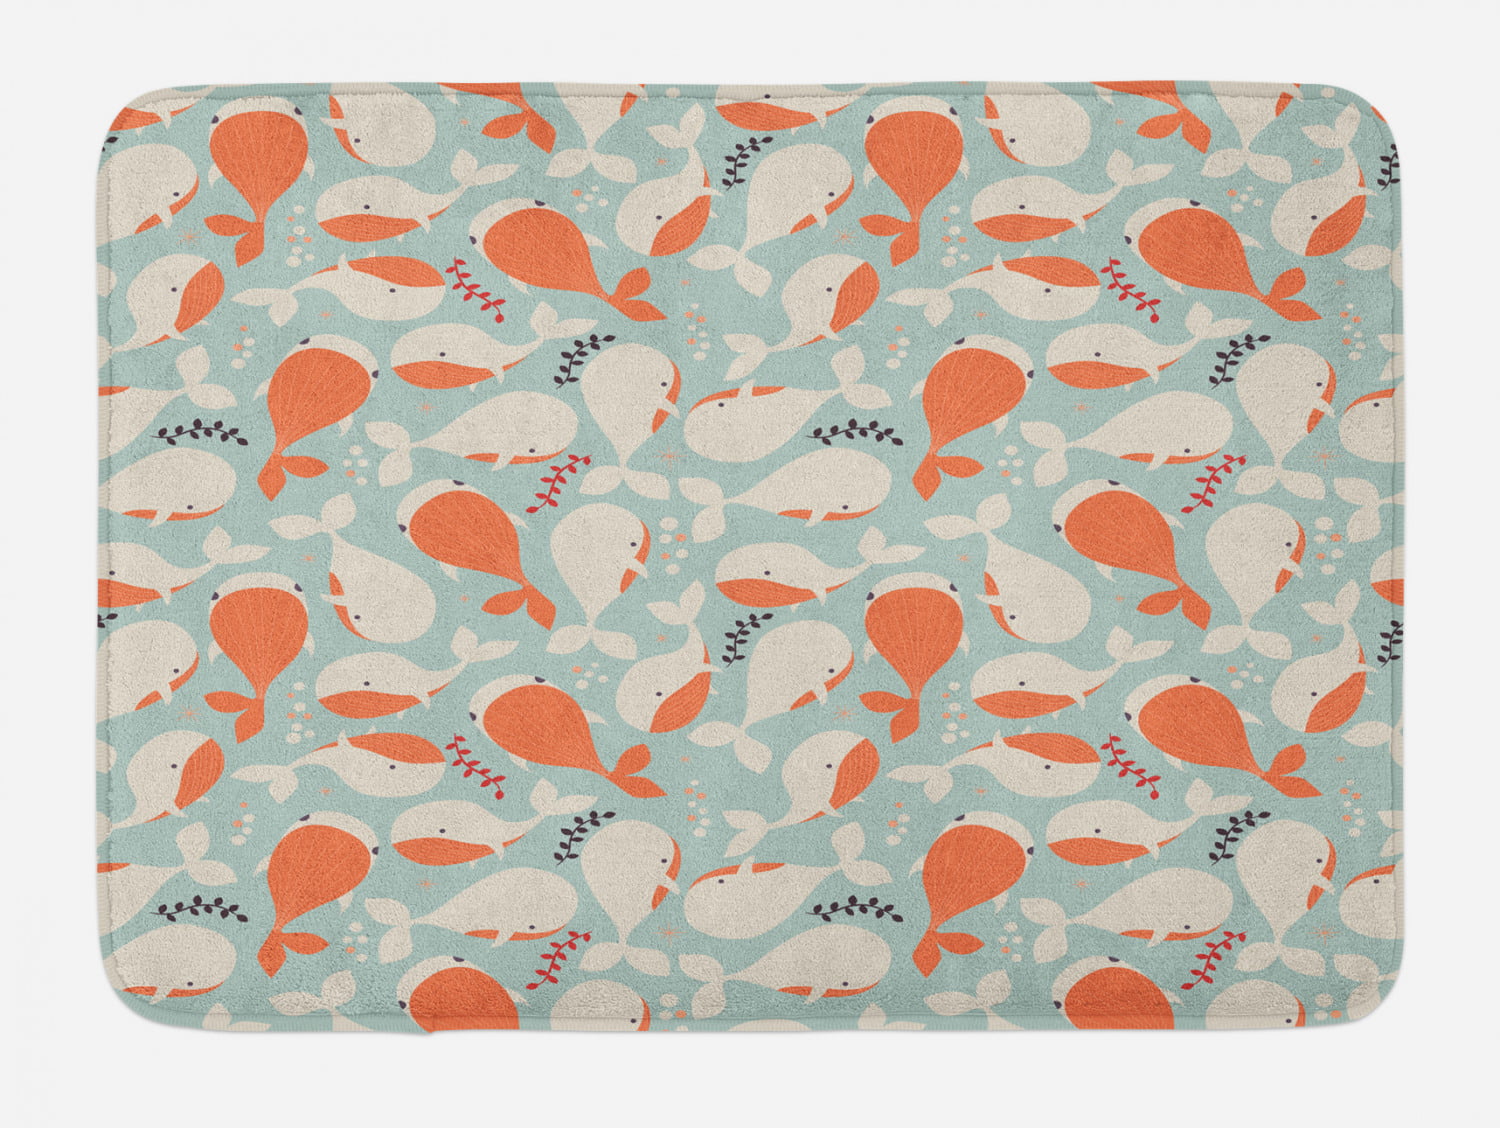 Underwater Graphic Algaes Coral Reefs Turtles Fishes The Life Aquatic Plush Bathroom Decor Mat with Non Slip Backing 29.5 X 17.5 Ambesonne Cartoon Bath Mat Navy Green 